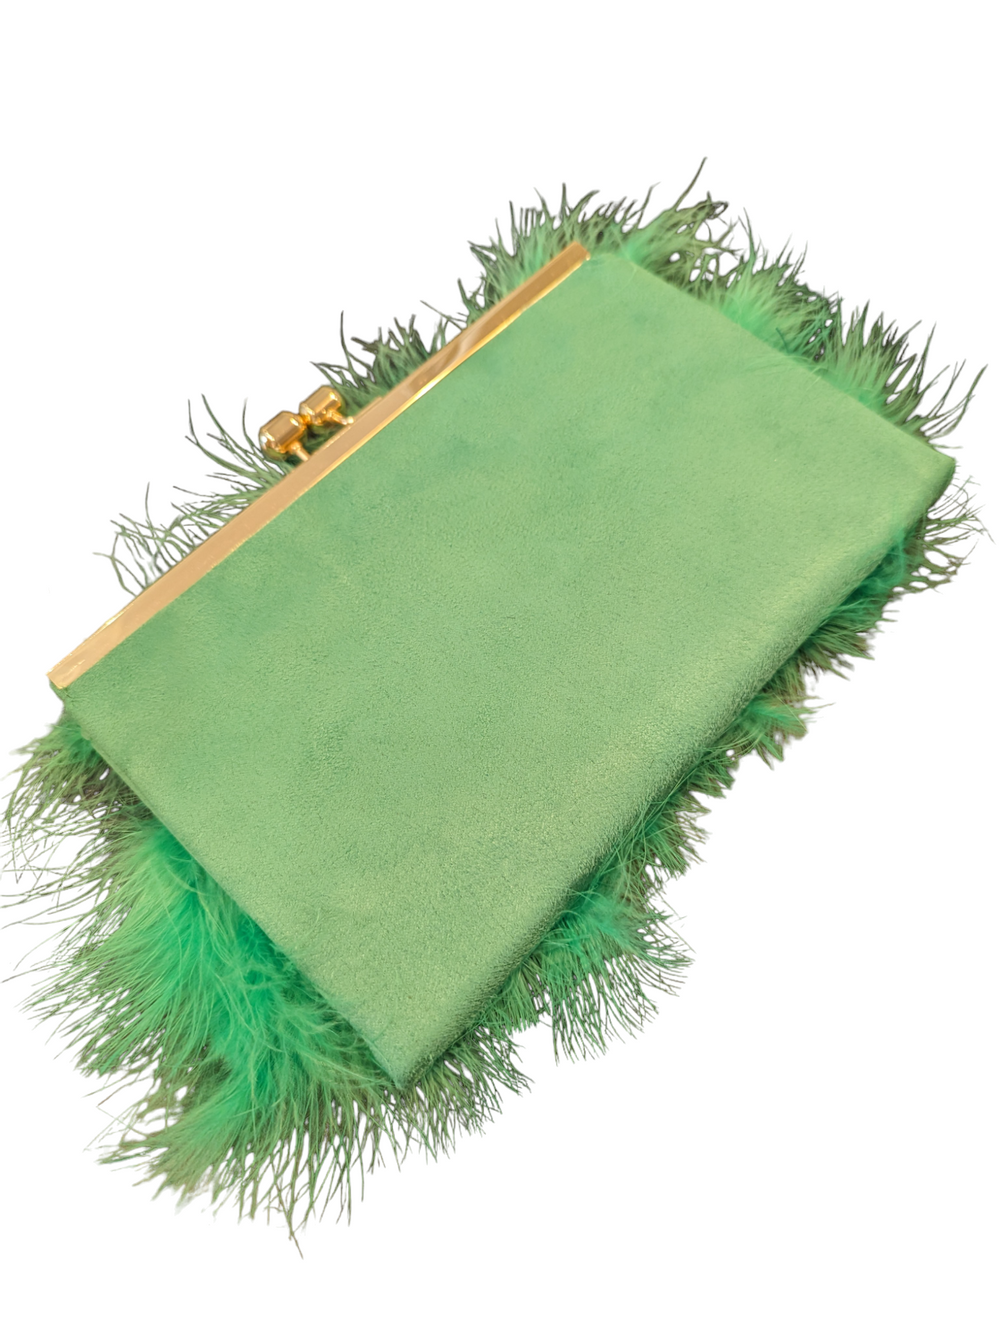 a shot of the back of the feather clutch that shows us the soft green fabric